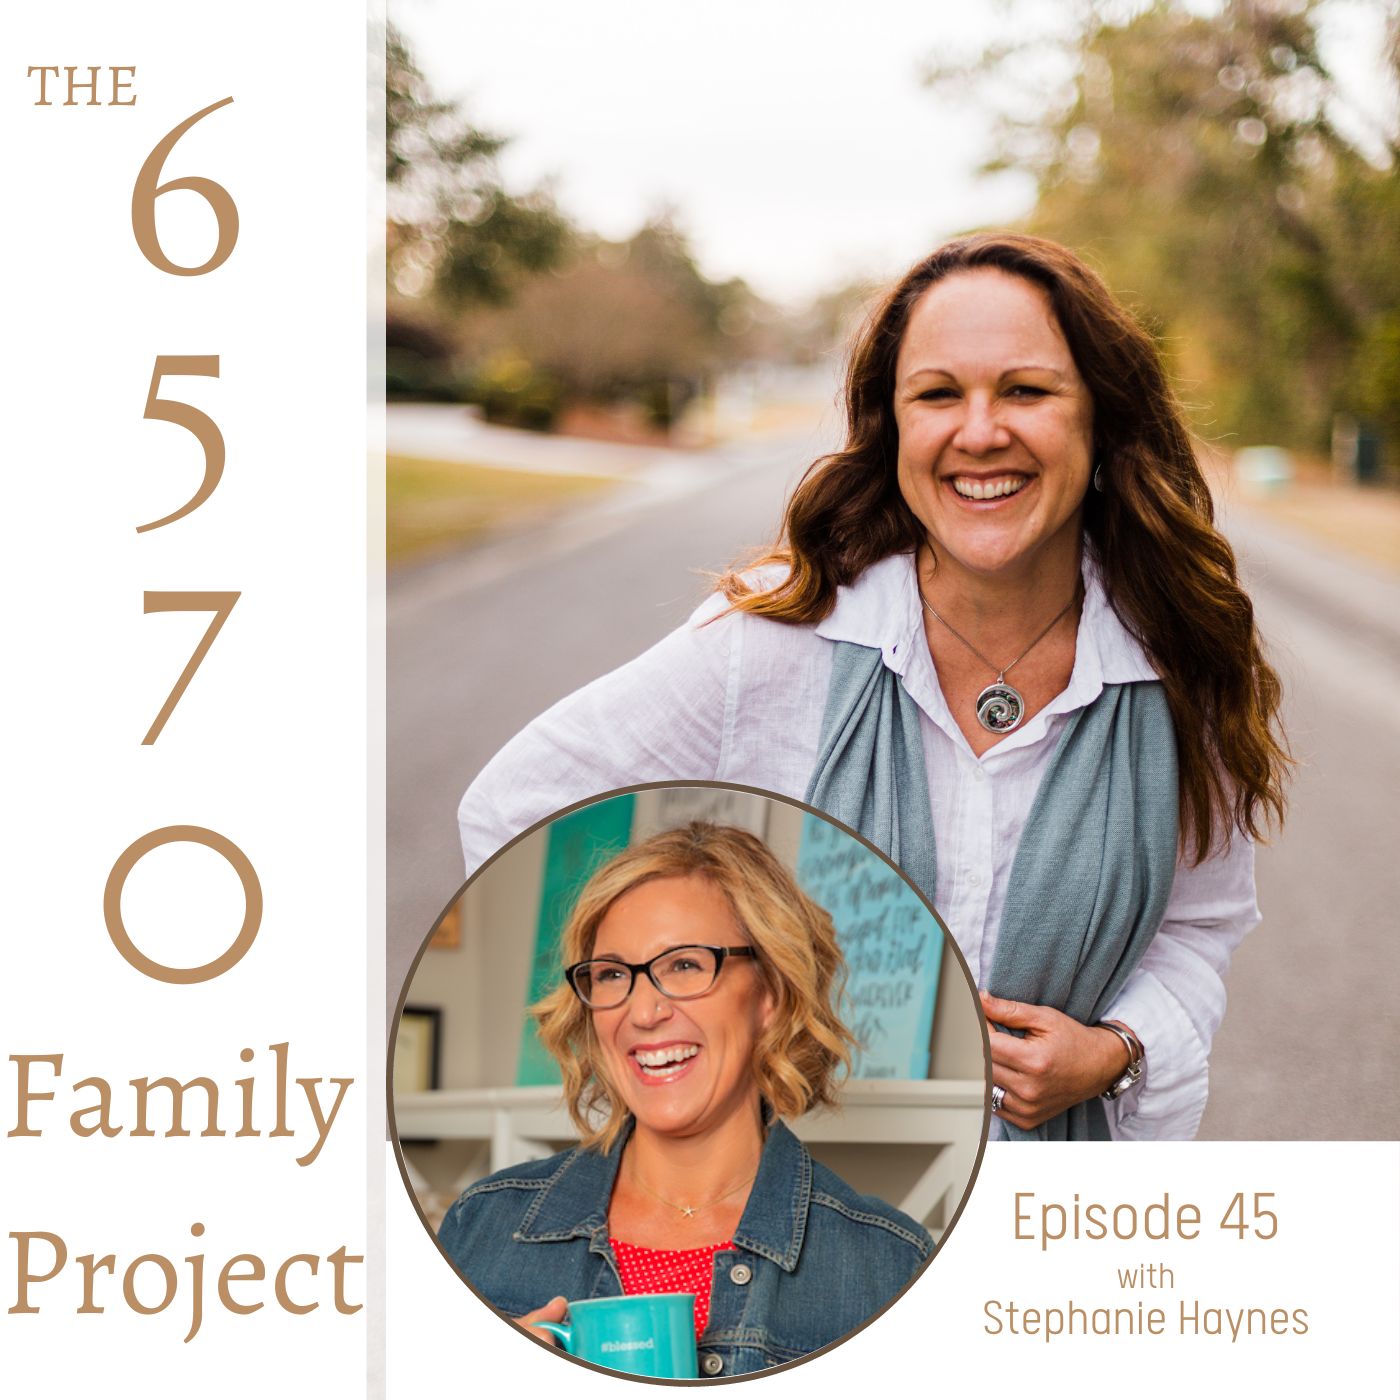 Artwork for podcast The 6570 Family Project